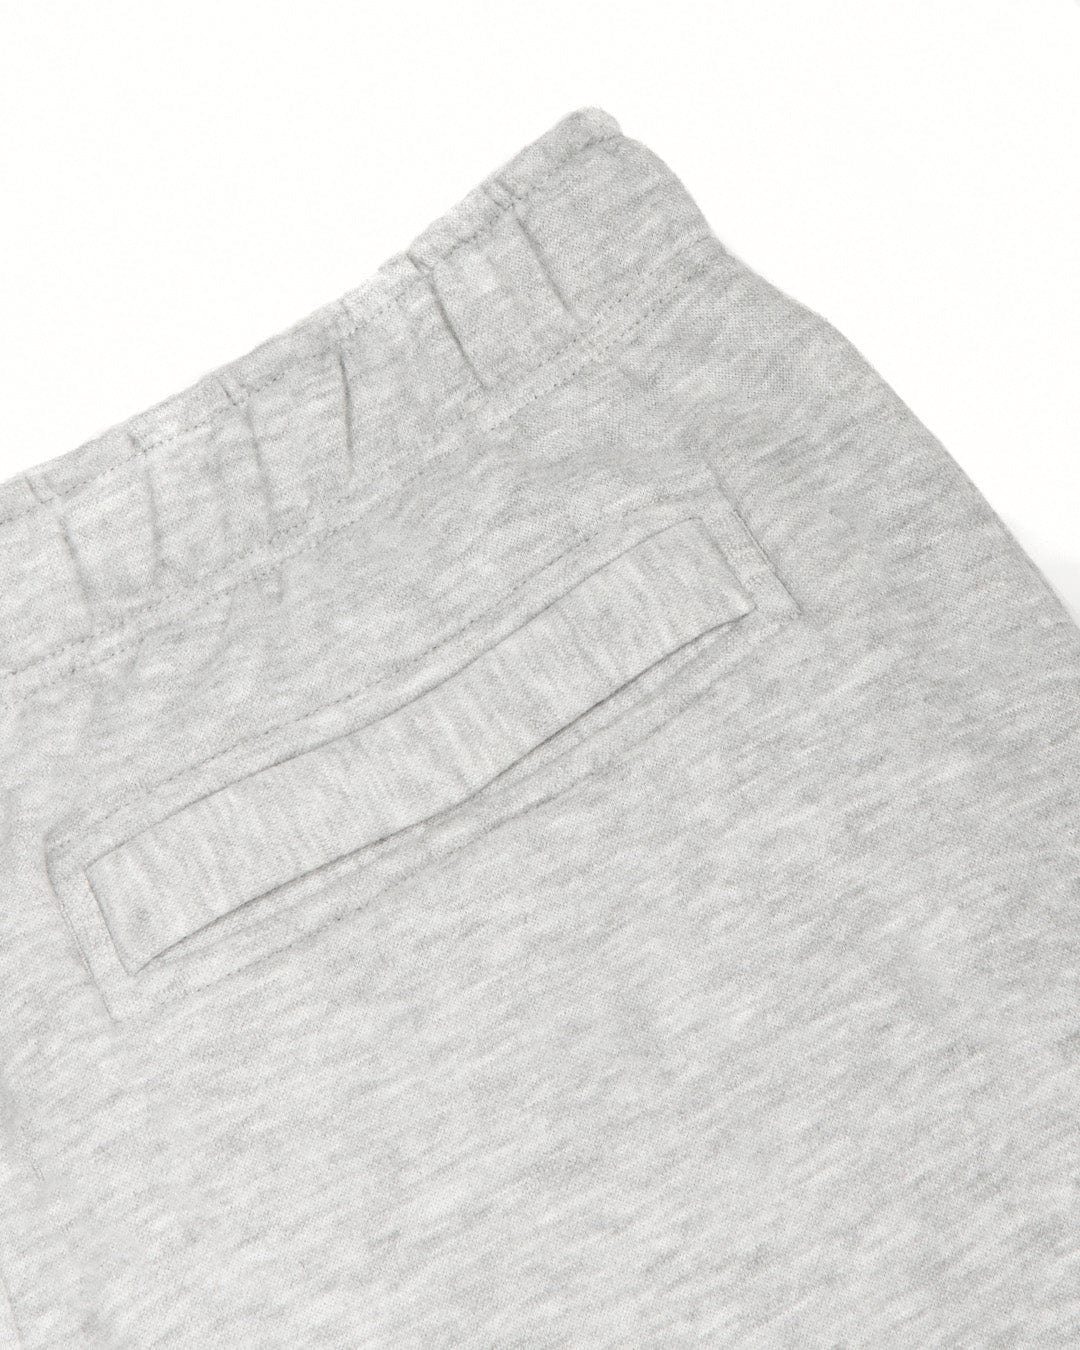 A close up of Saltrock - Mens Original 20 Jogger - Grey, featuring Saltrock branding for a comfy yet stylish look.